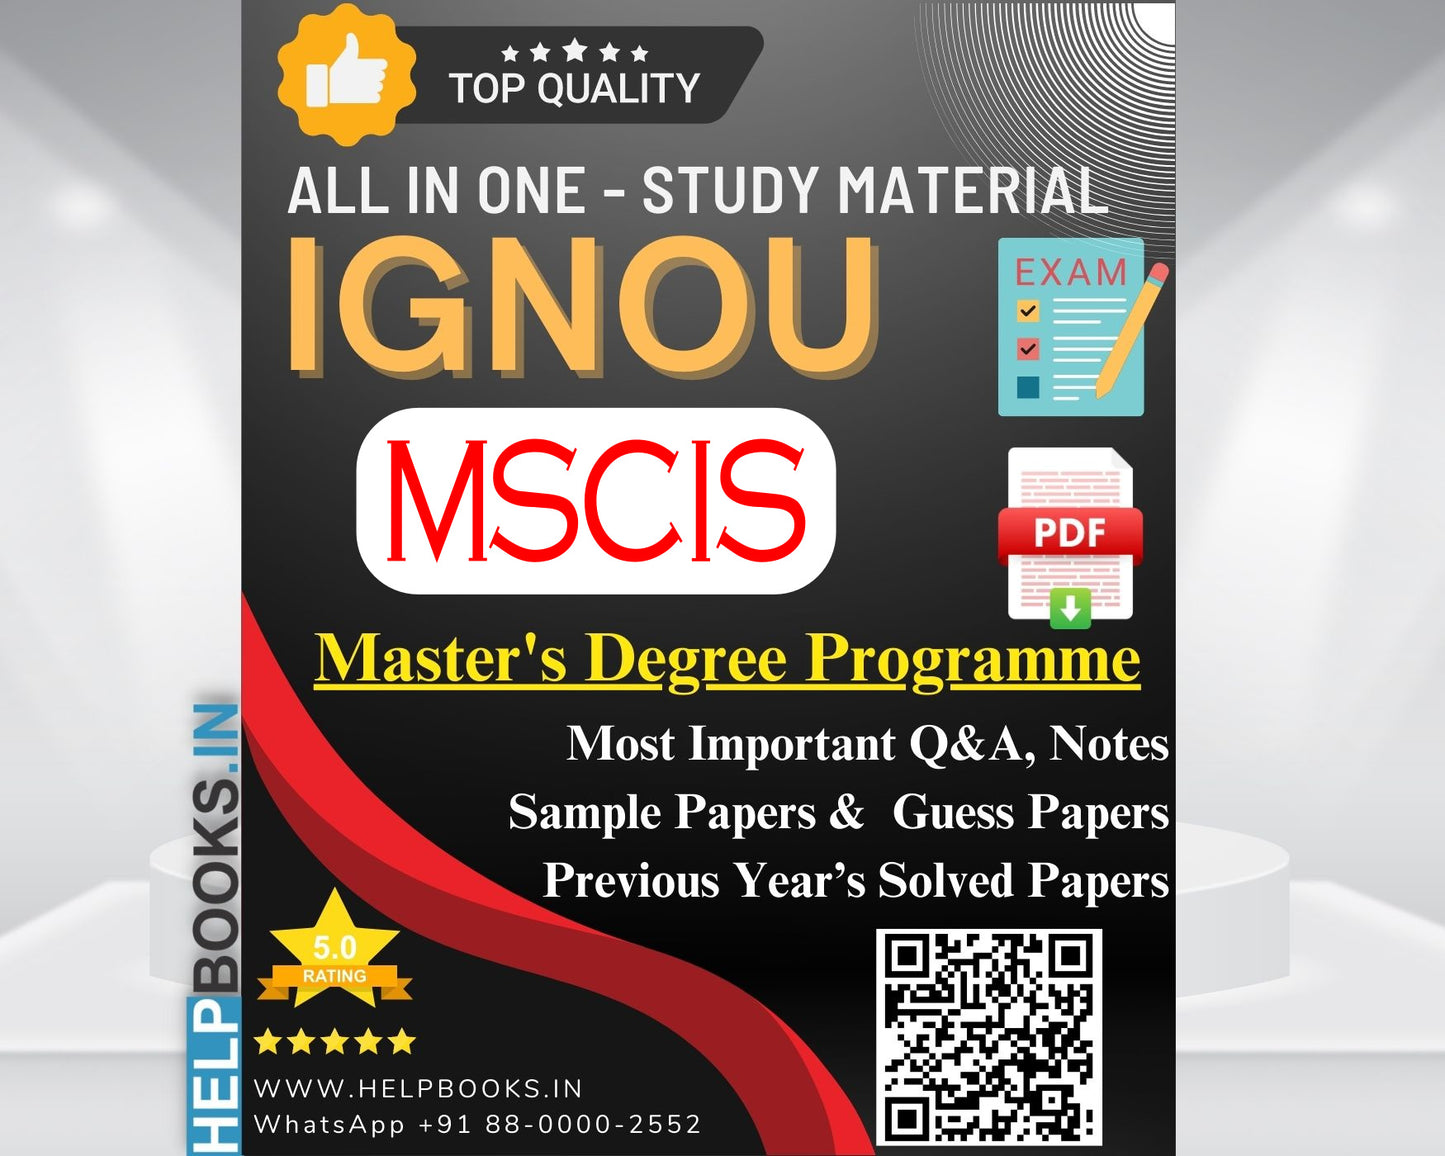 MSCIS IGNOU Exam Combo of 10 Solved Papers: 5 Previous Years' Solved Papers & 5 Sample Guess Papers for Master of Science Information Security